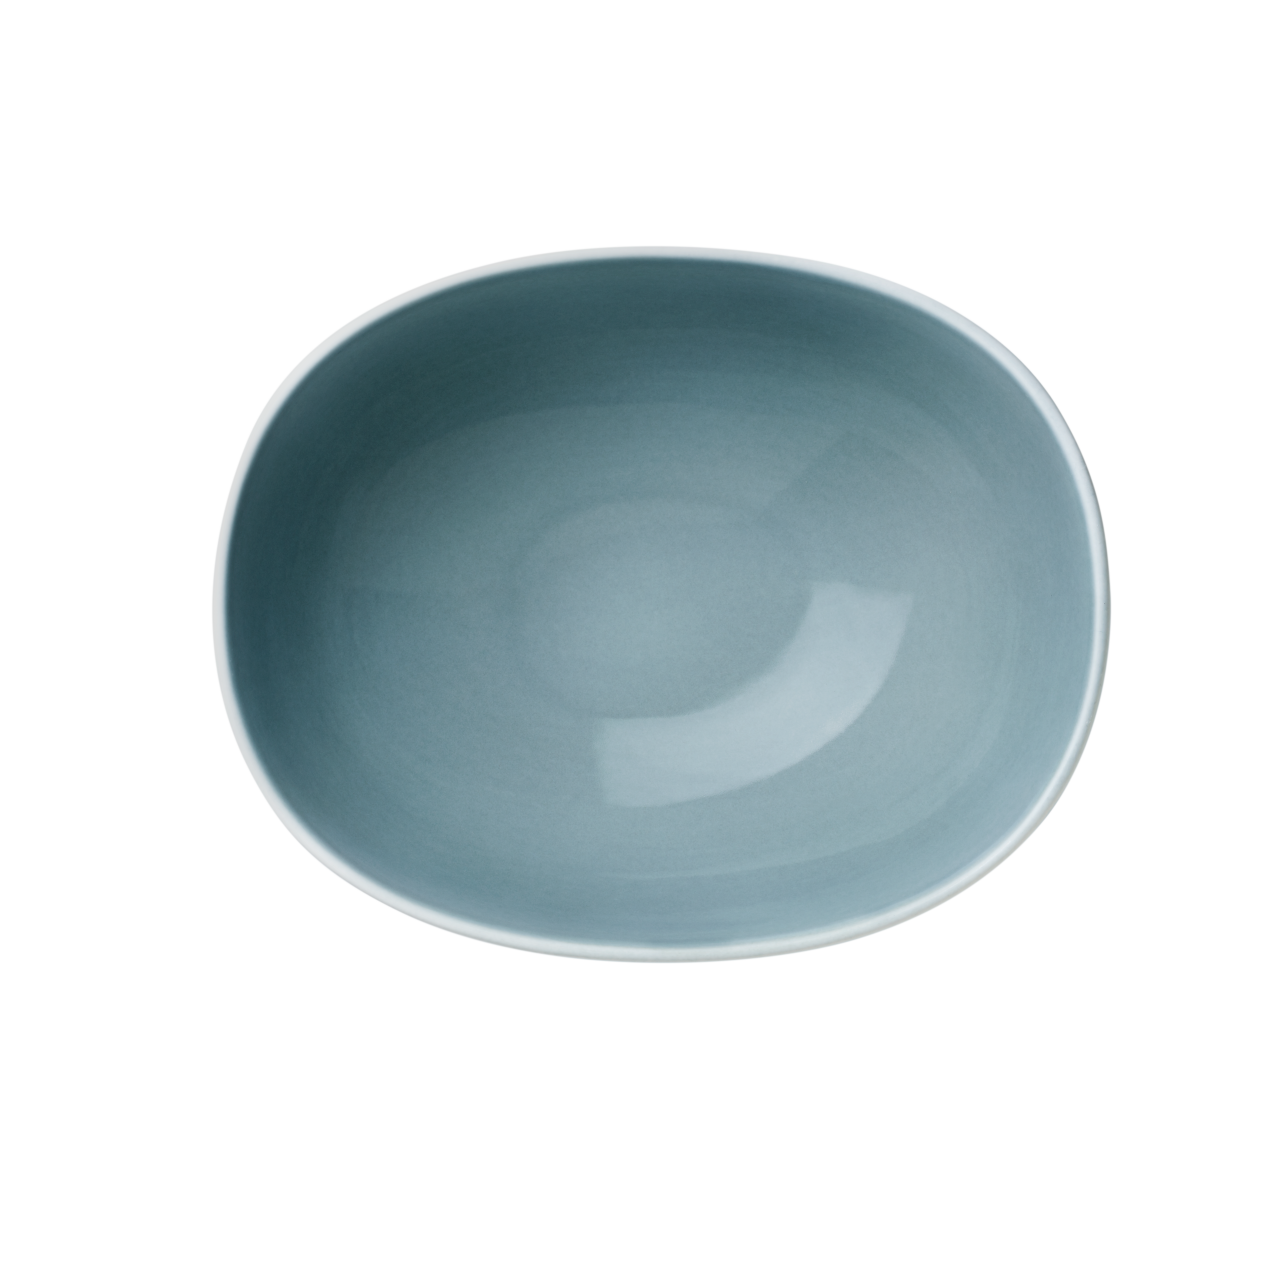 Oyster - Oval Bowl